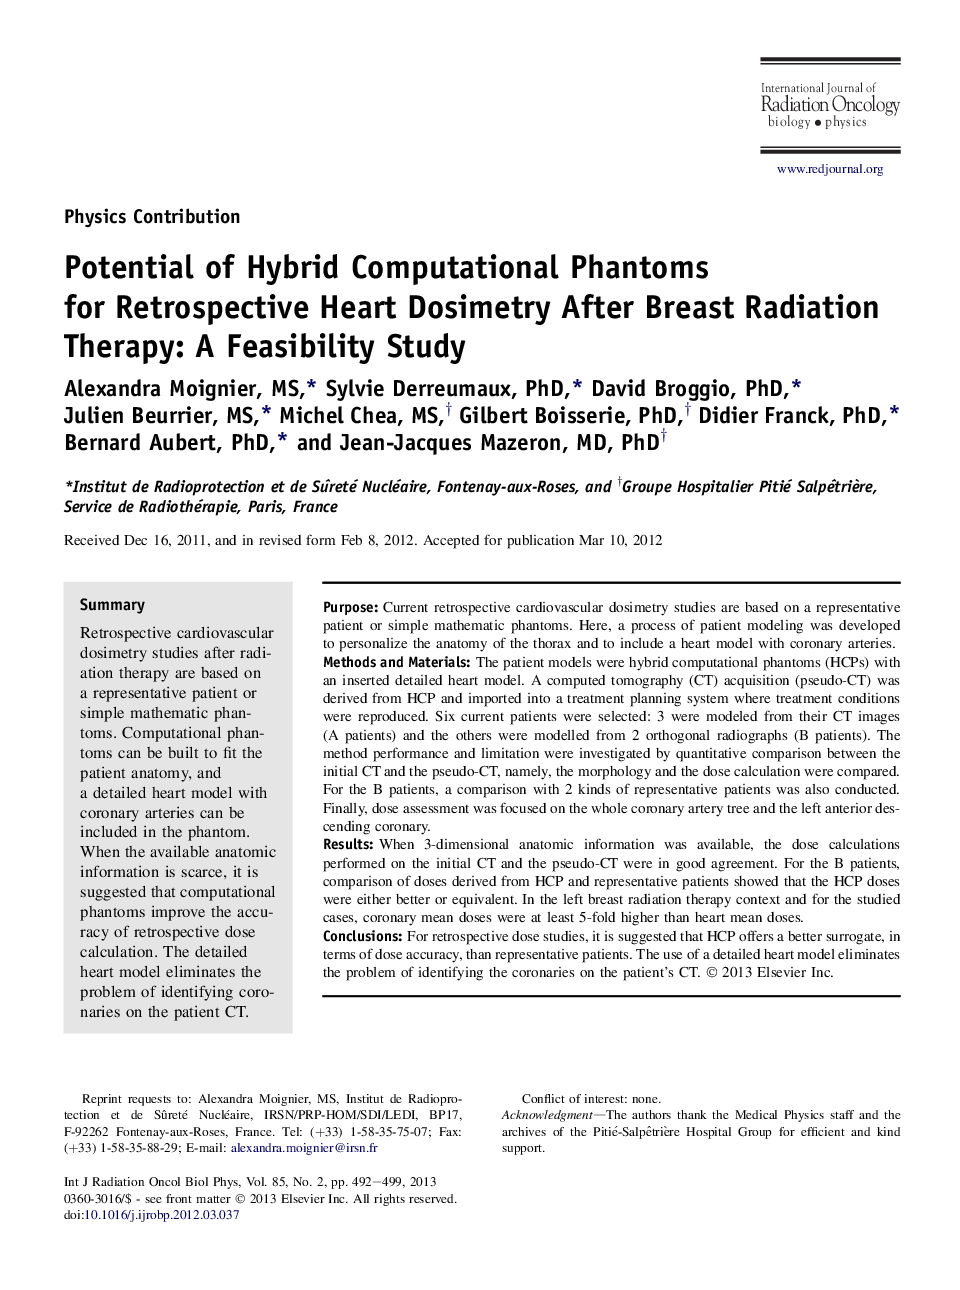 Potential of Hybrid Computational Phantoms for Retrospective Heart Dosimetry After Breast Radiation Therapy: A Feasibility Study